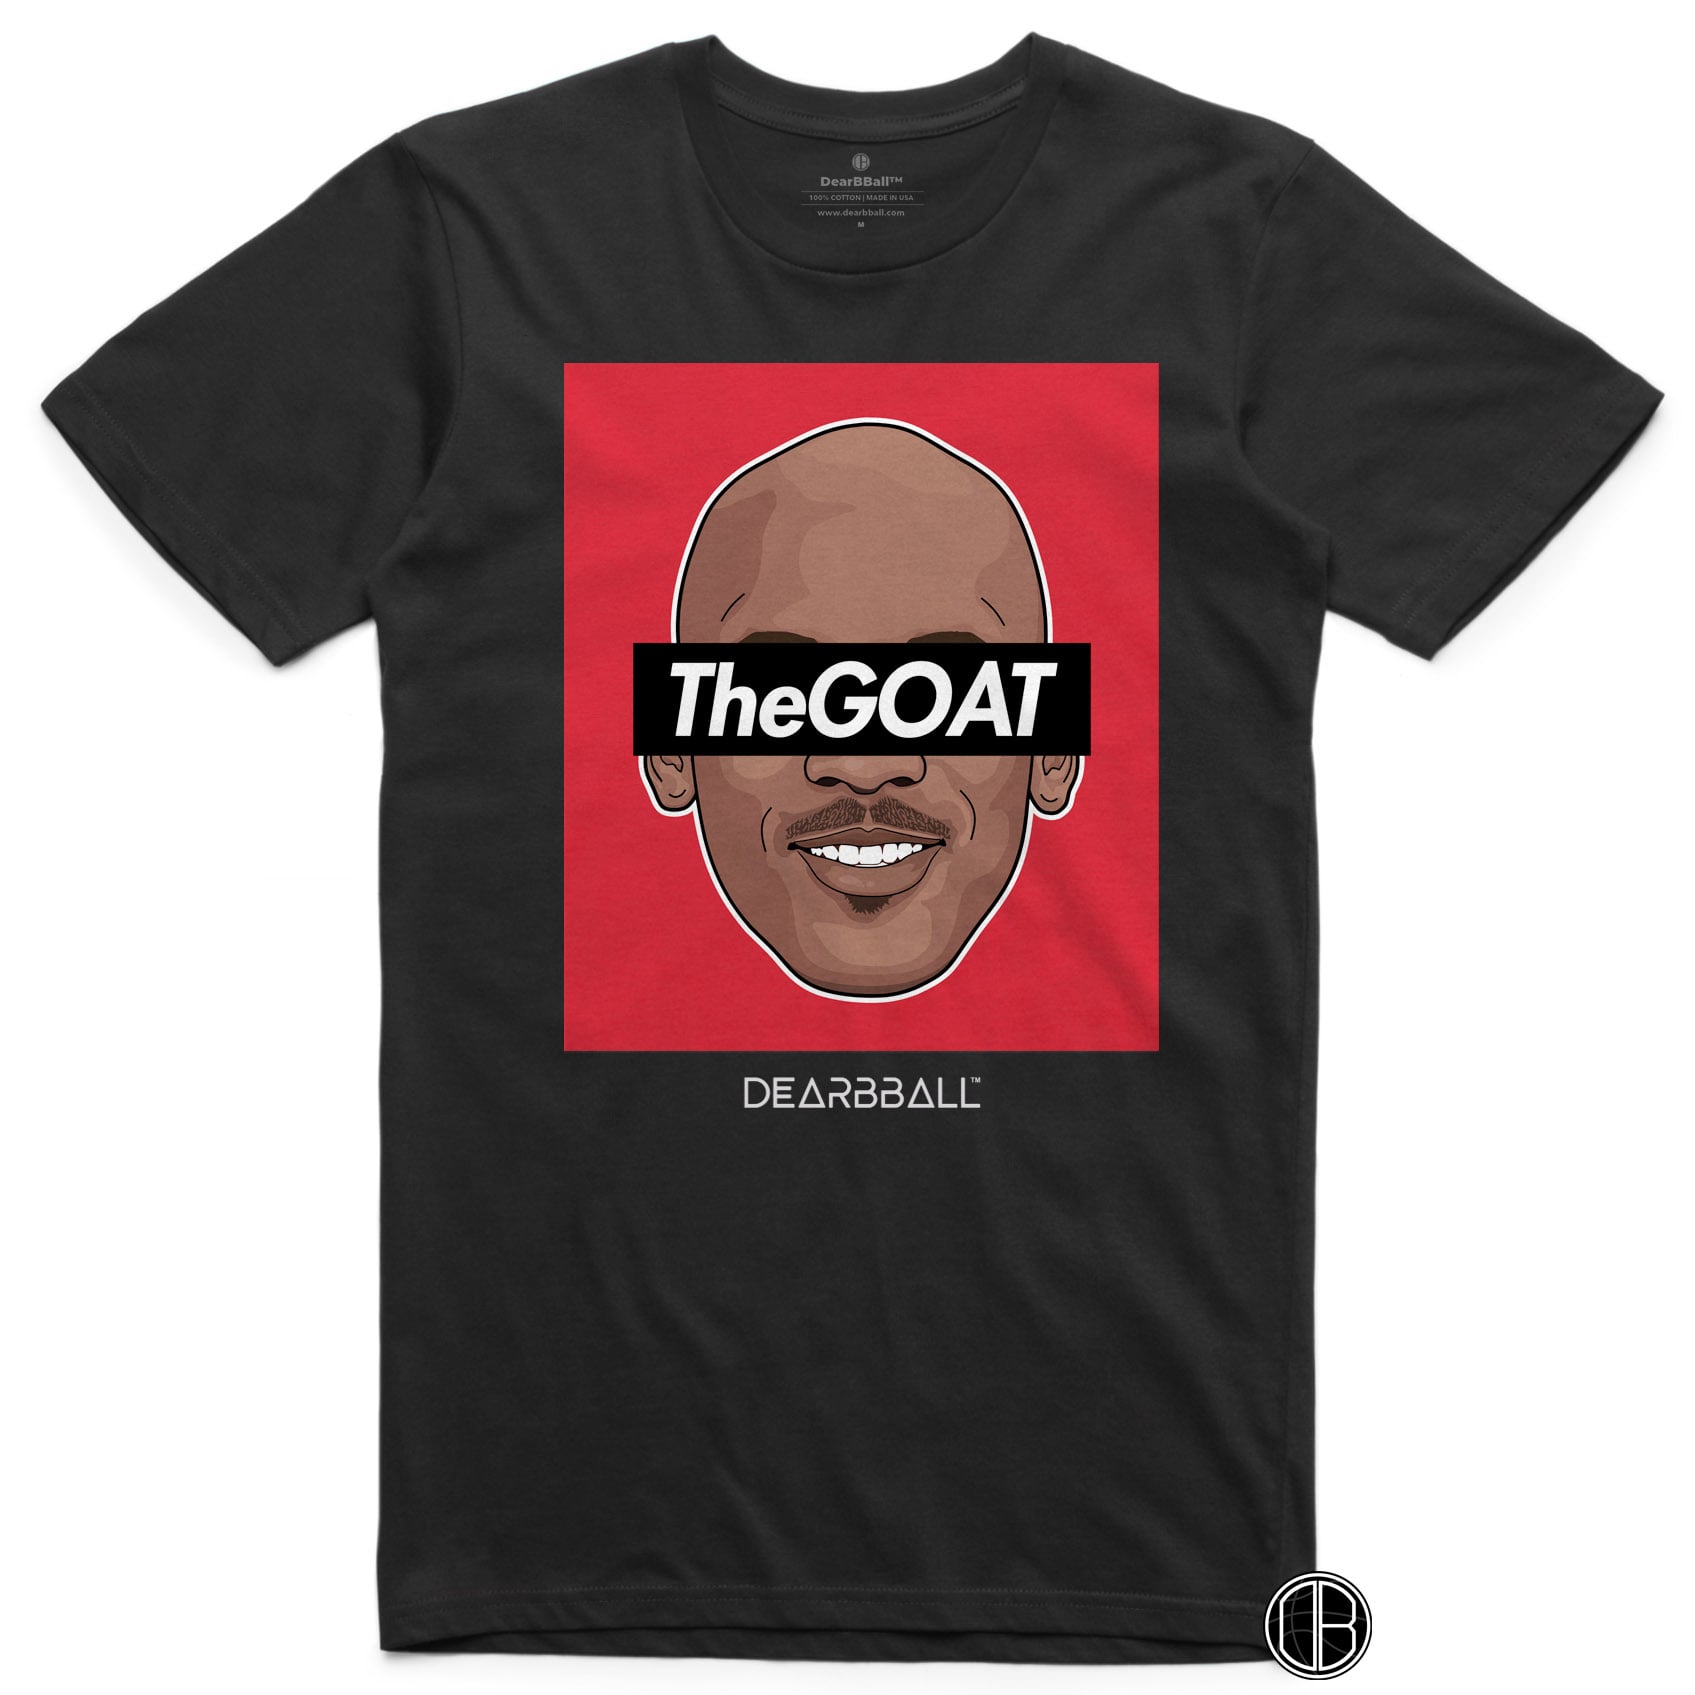 Maglietta DearBBall - TheGOAT Red Edition